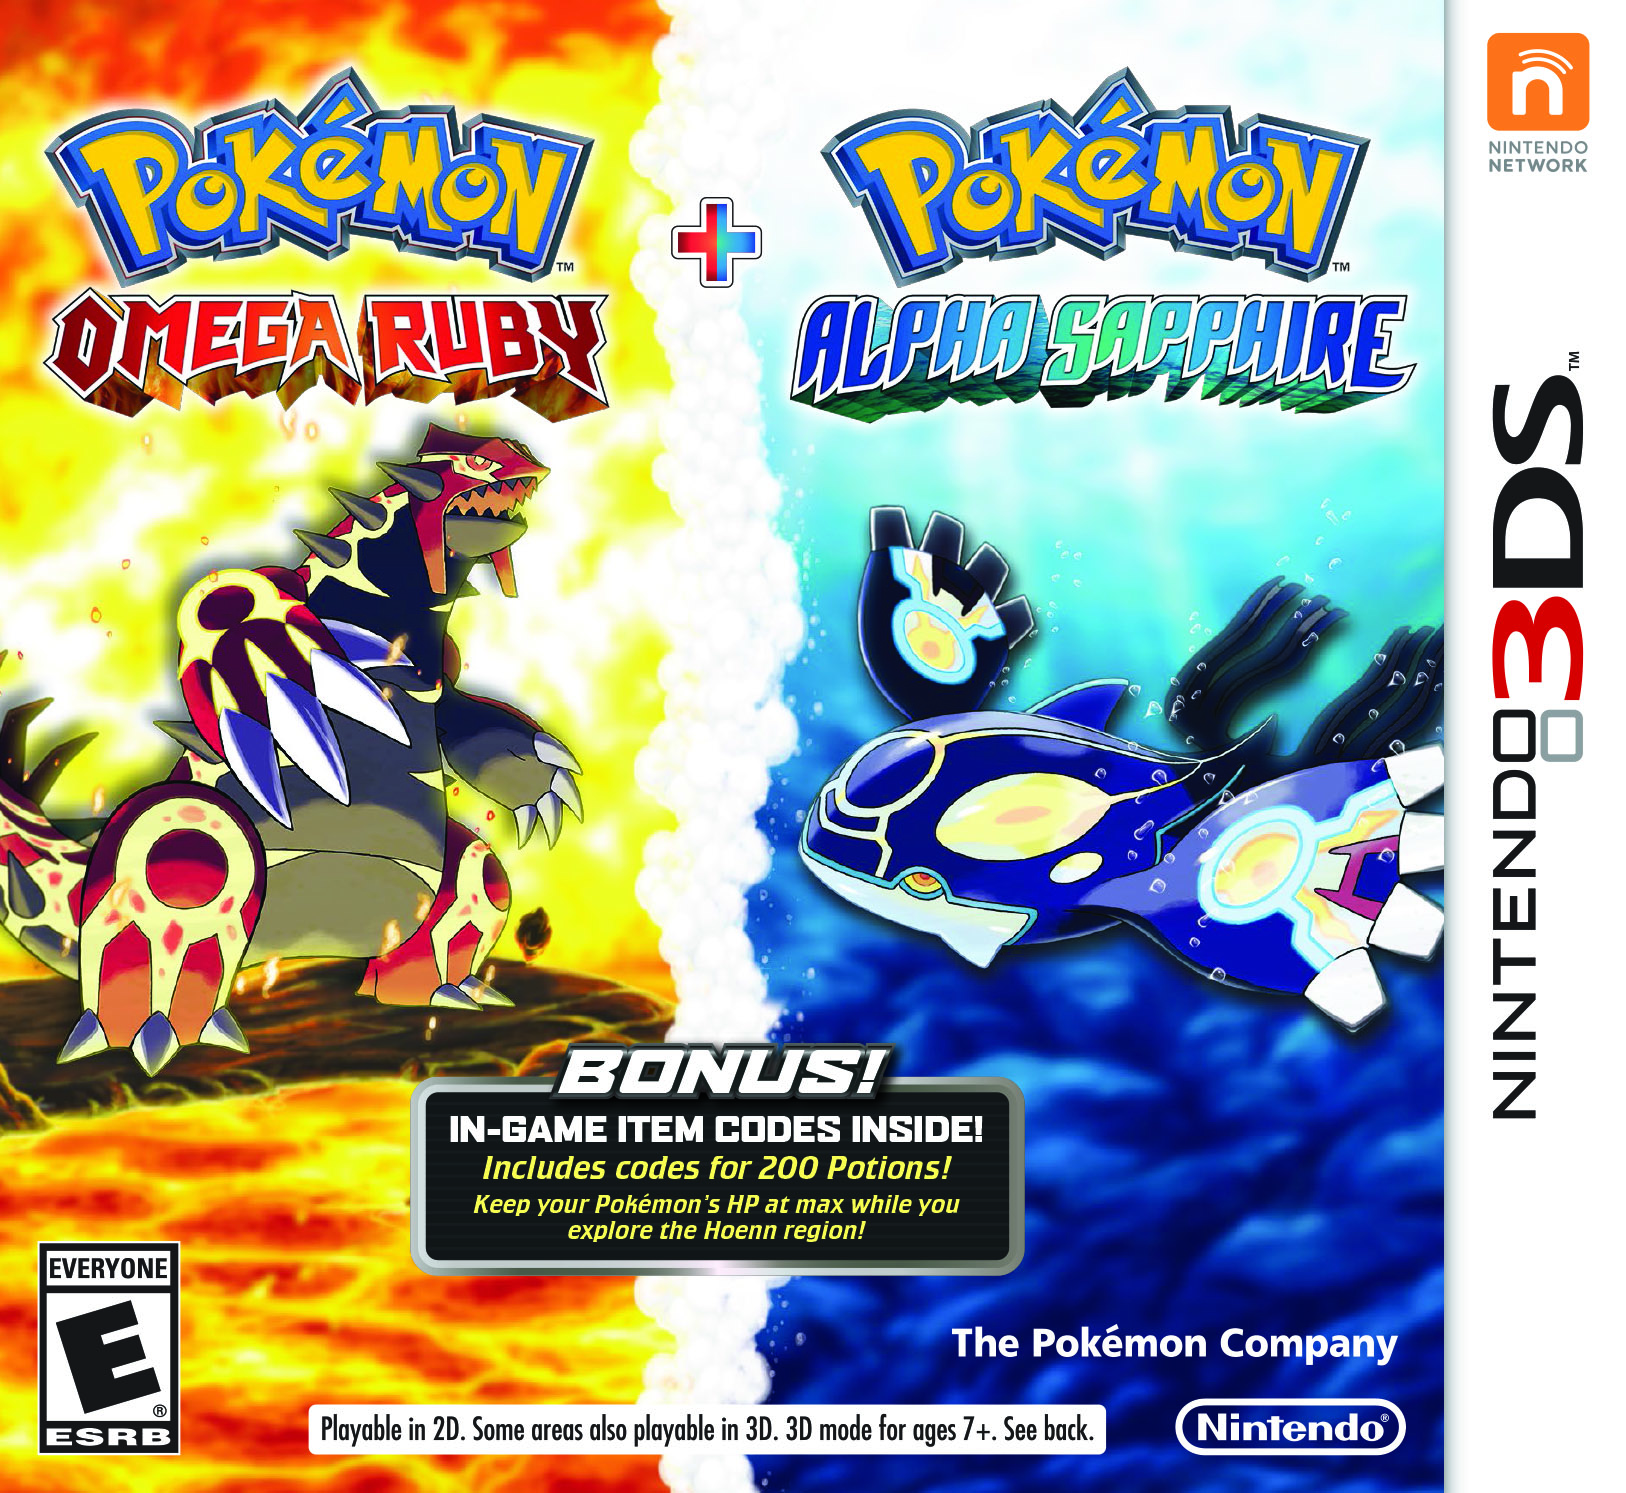 Pokémon Omega Ruby And Alpha Sapphire Backgrounds, Compatible - PC, Mobile, Gadgets| 1626x1493 px